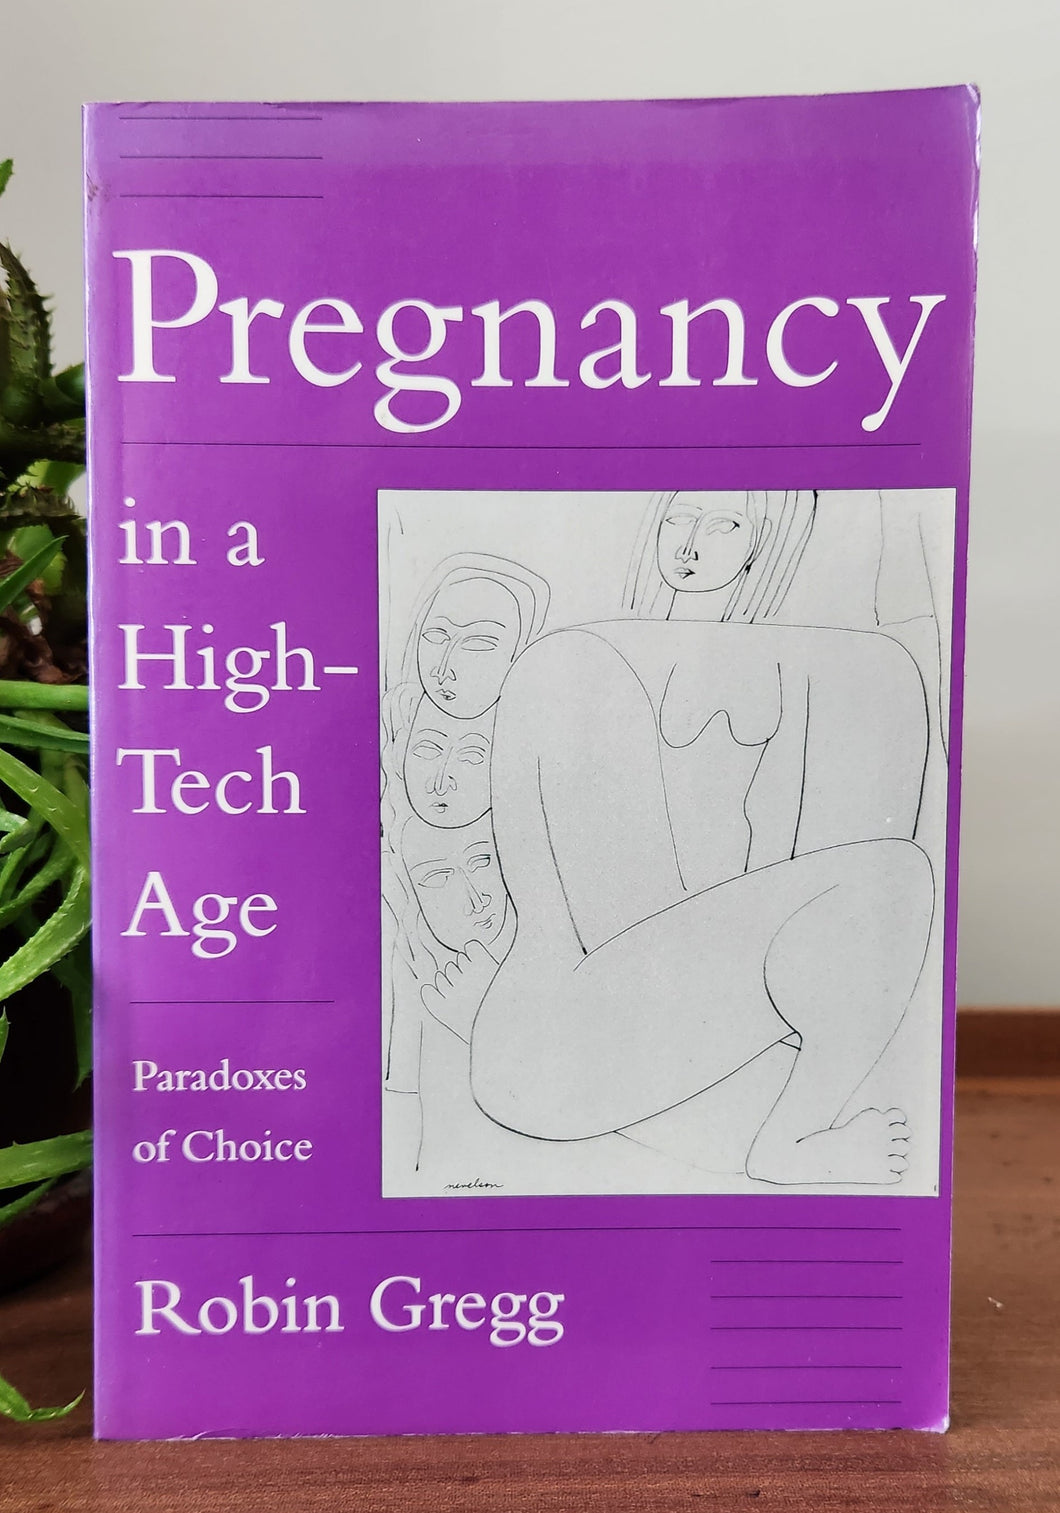 Pregnancy in a High-Tech Age: Paradoxes of Choice by Robin Gregg